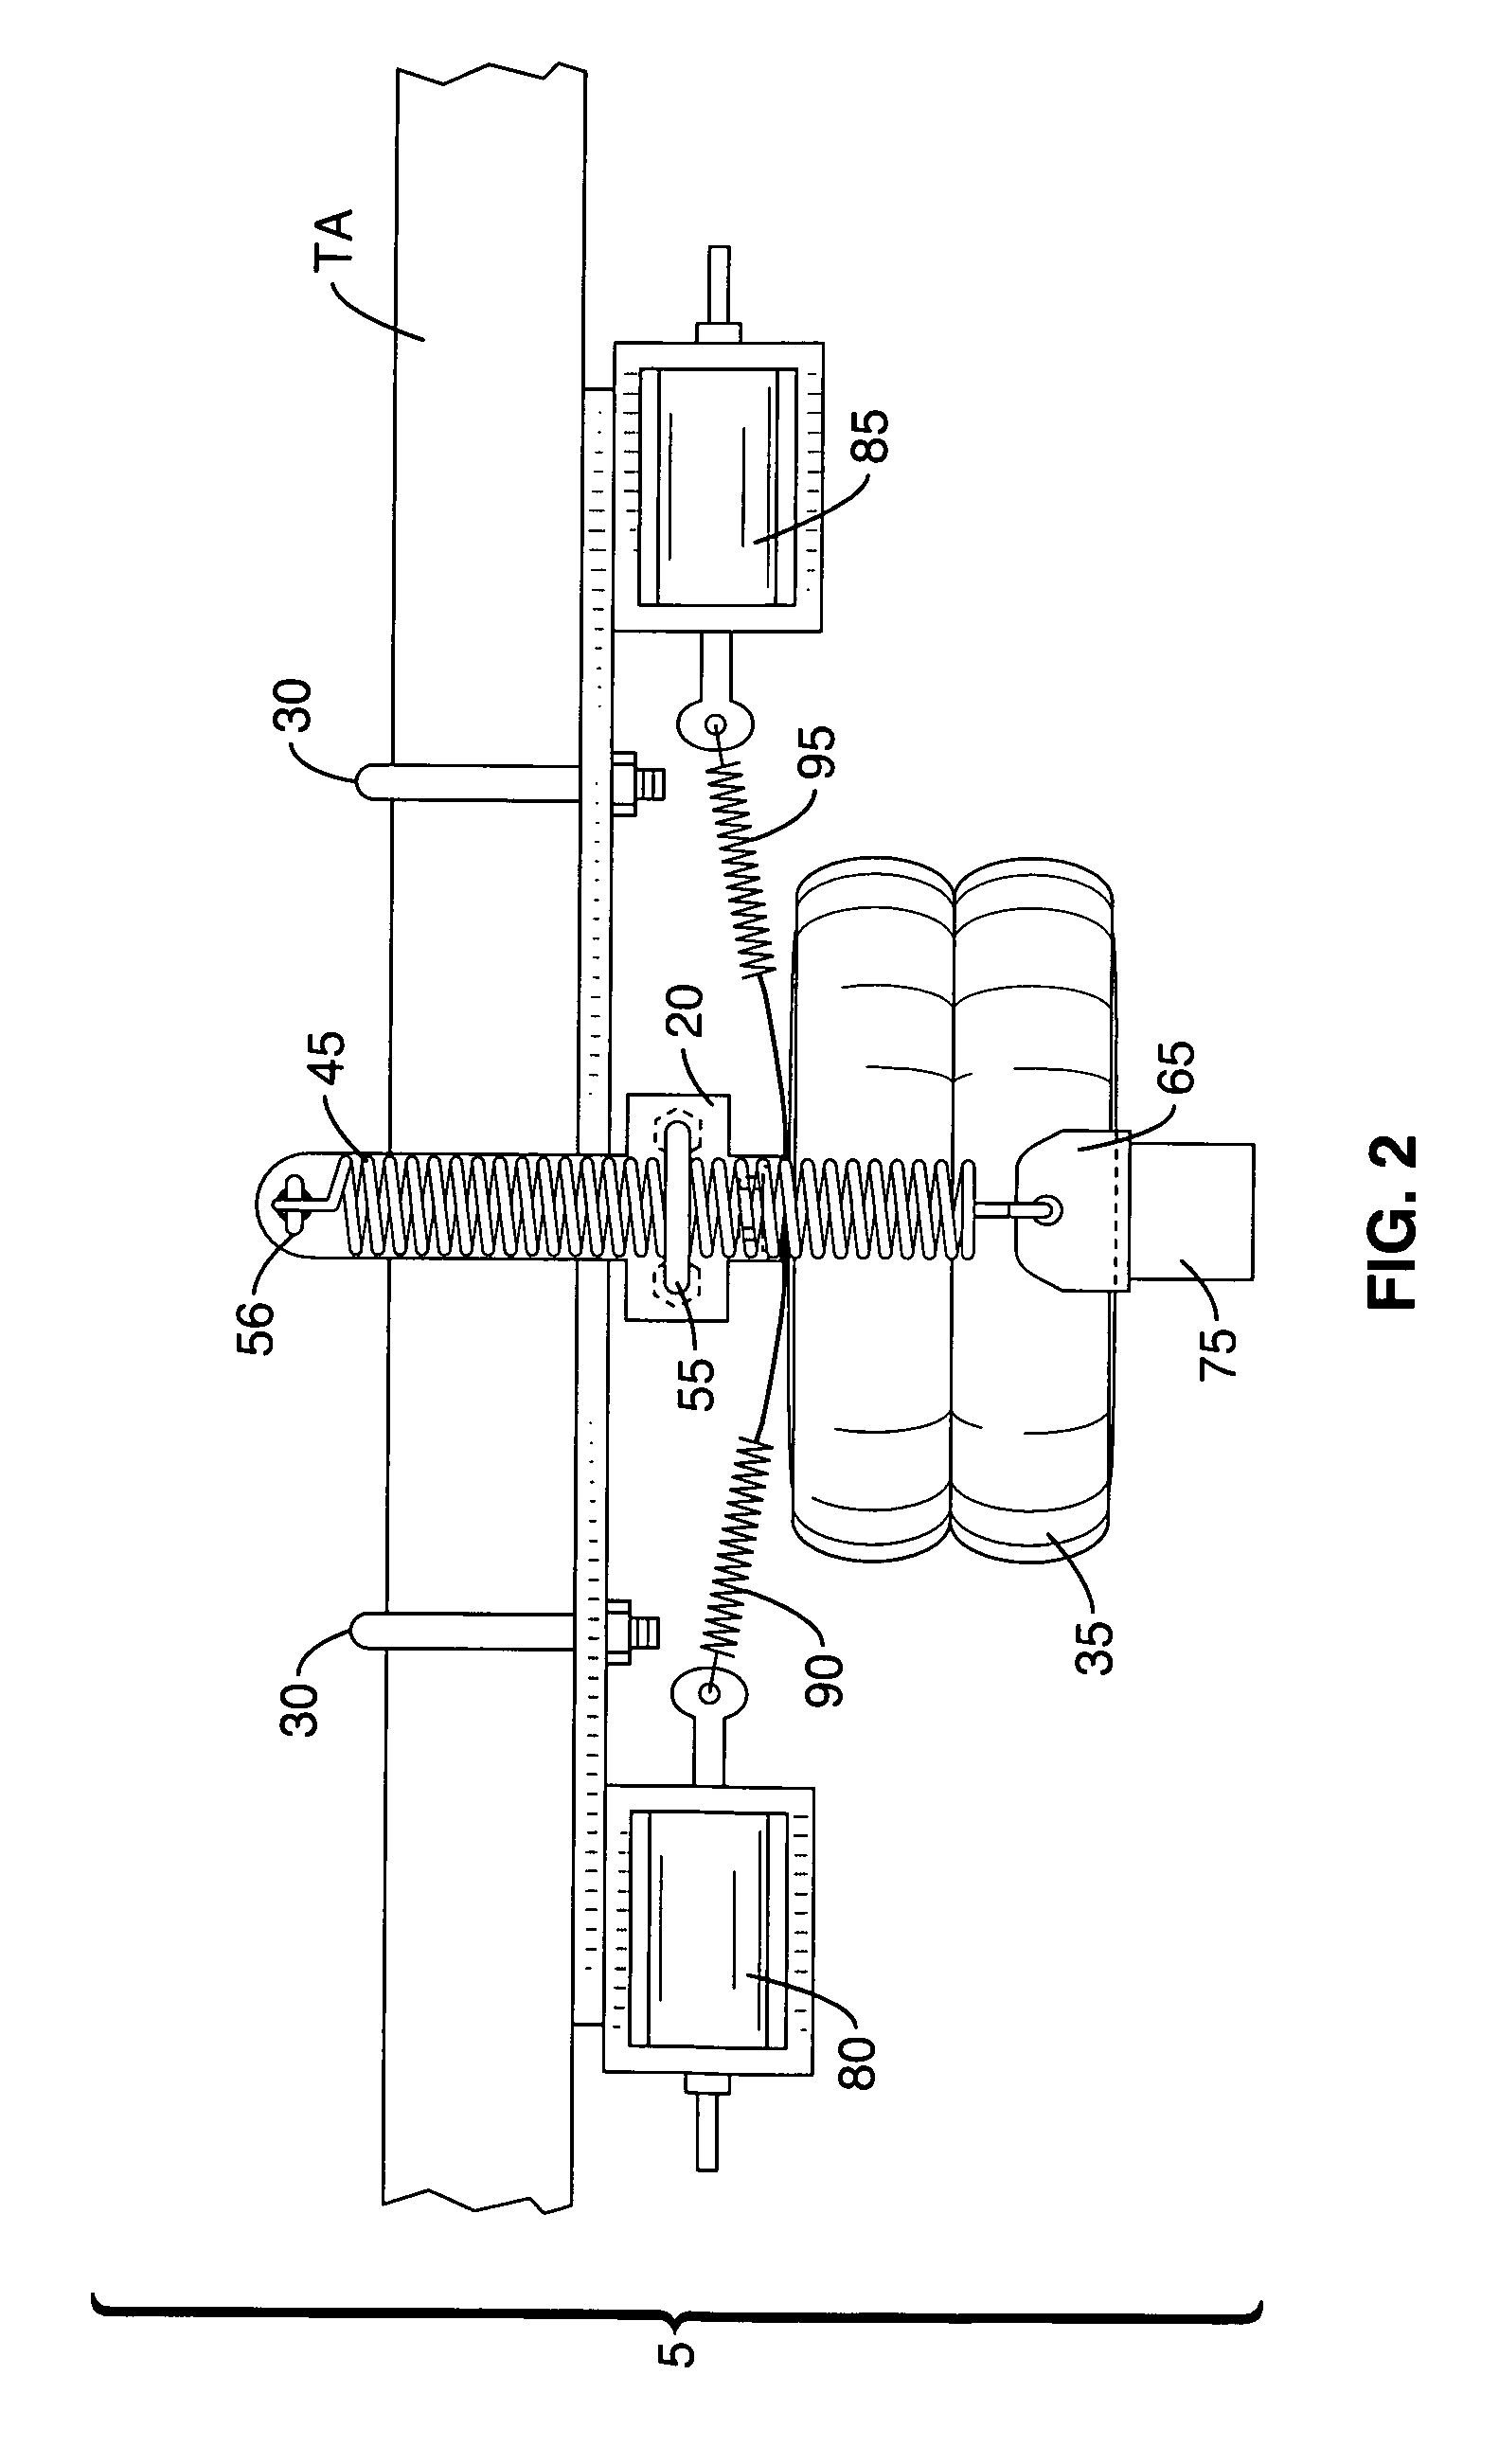 Vehicle lateral-motion apparatus